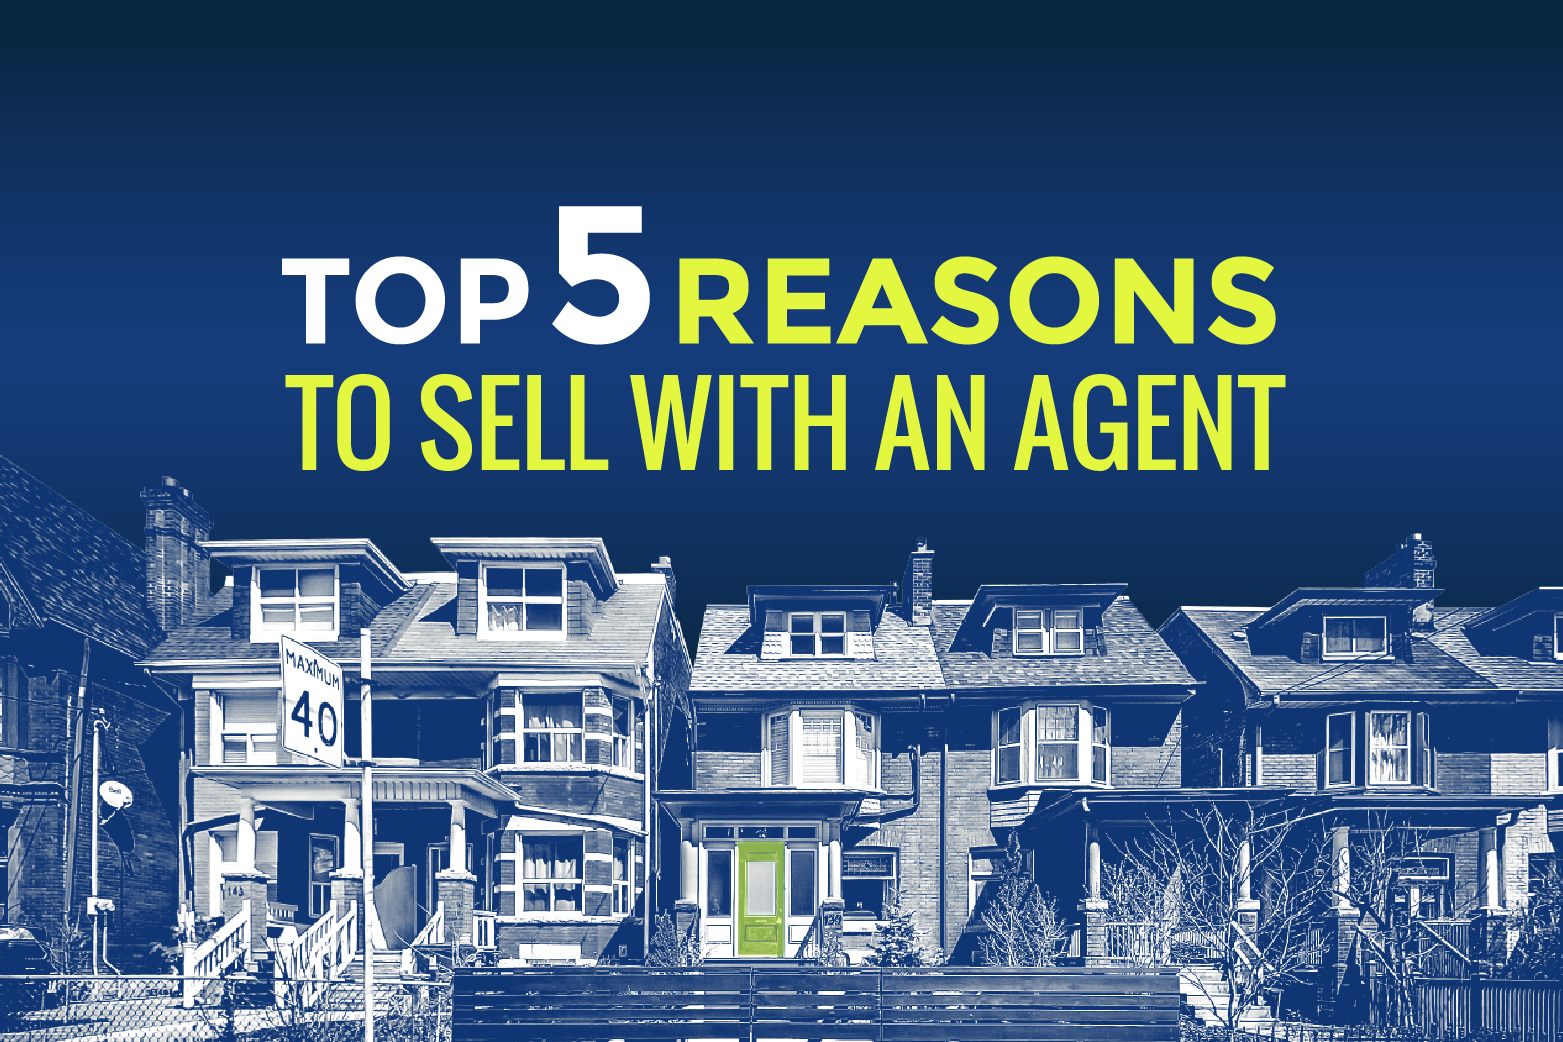 Top 5 Reasons To Sell Your Home With An Agent